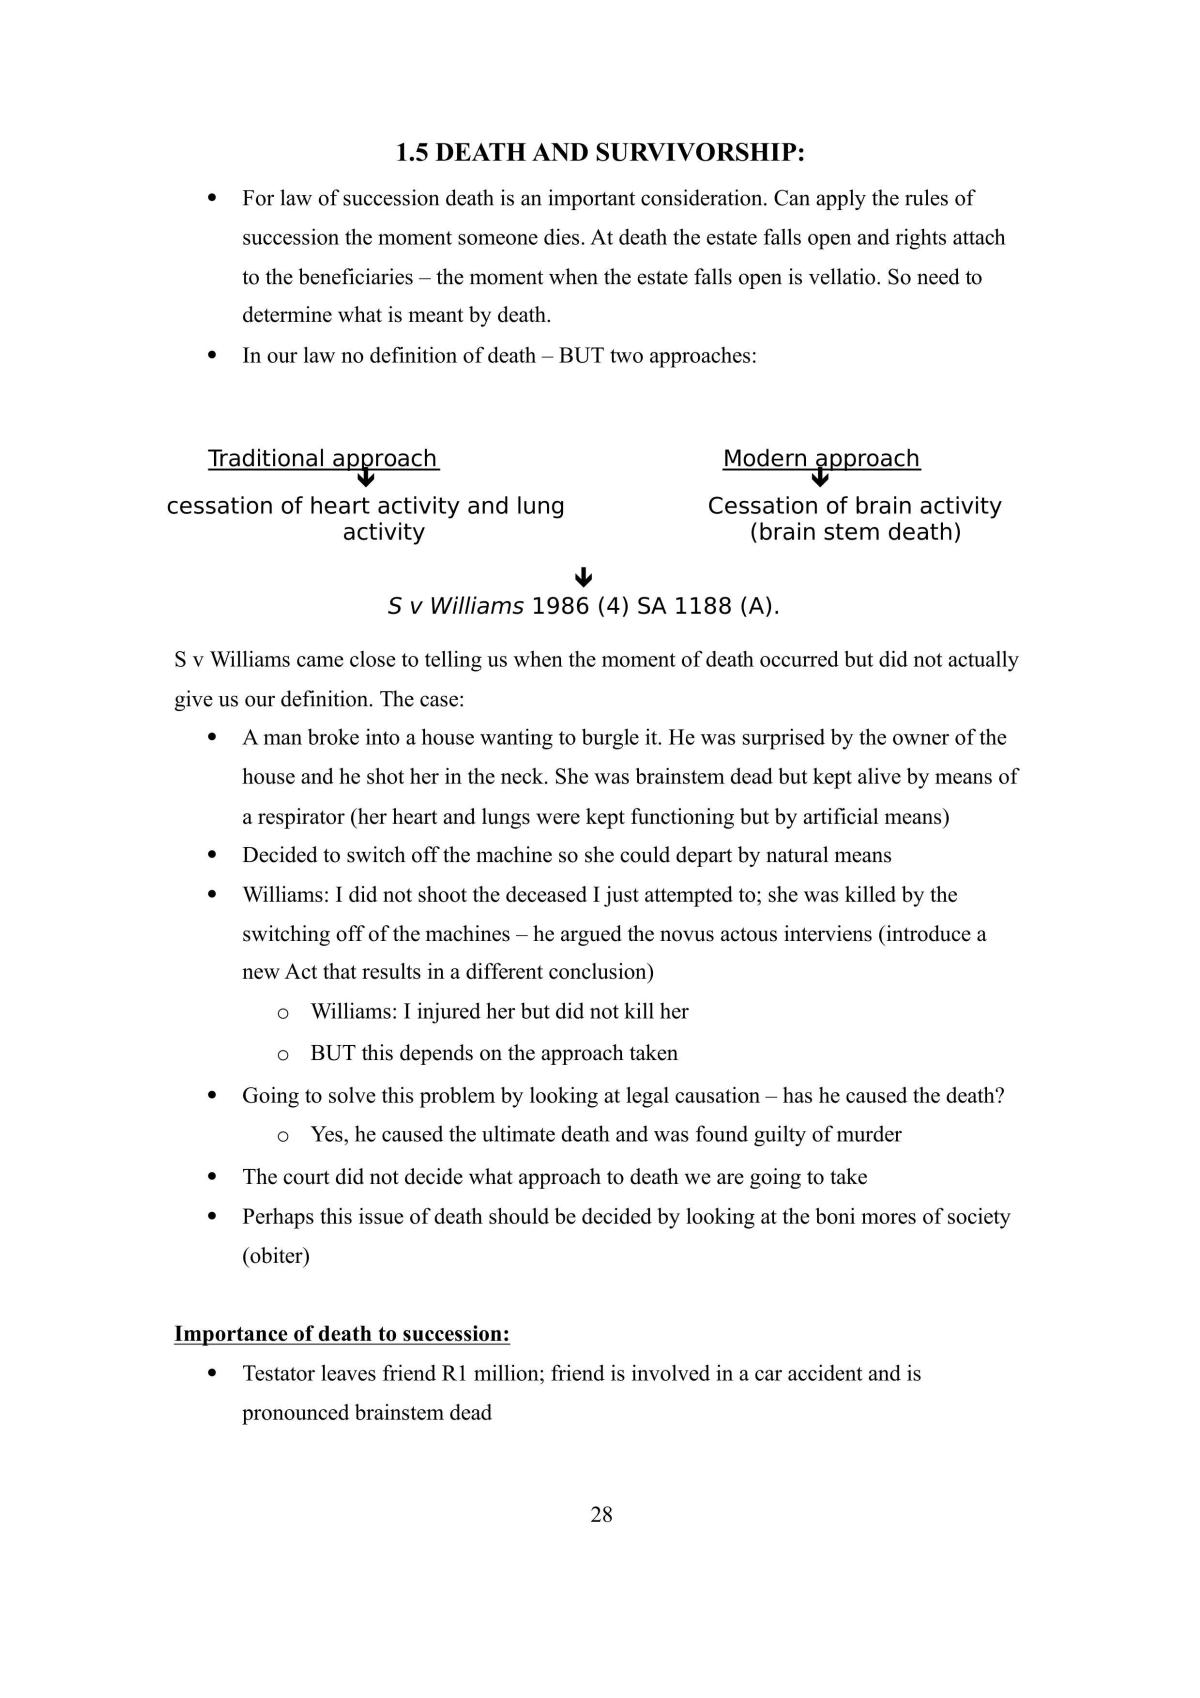 Topic 1 - Introduction - Page 28